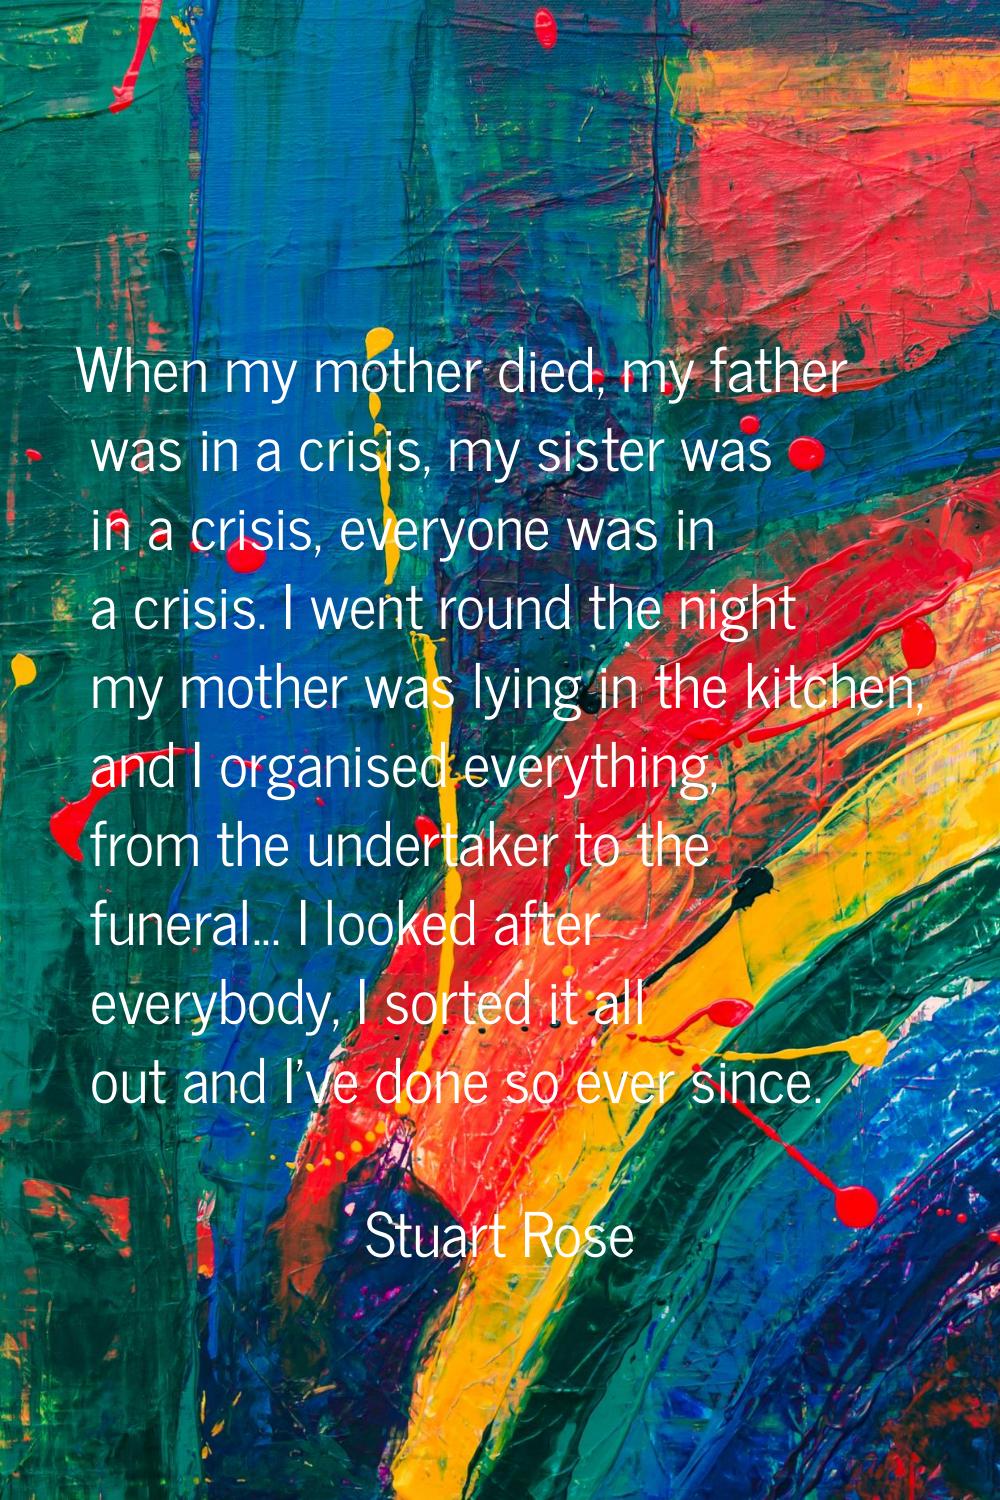 When my mother died, my father was in a crisis, my sister was in a crisis, everyone was in a crisis